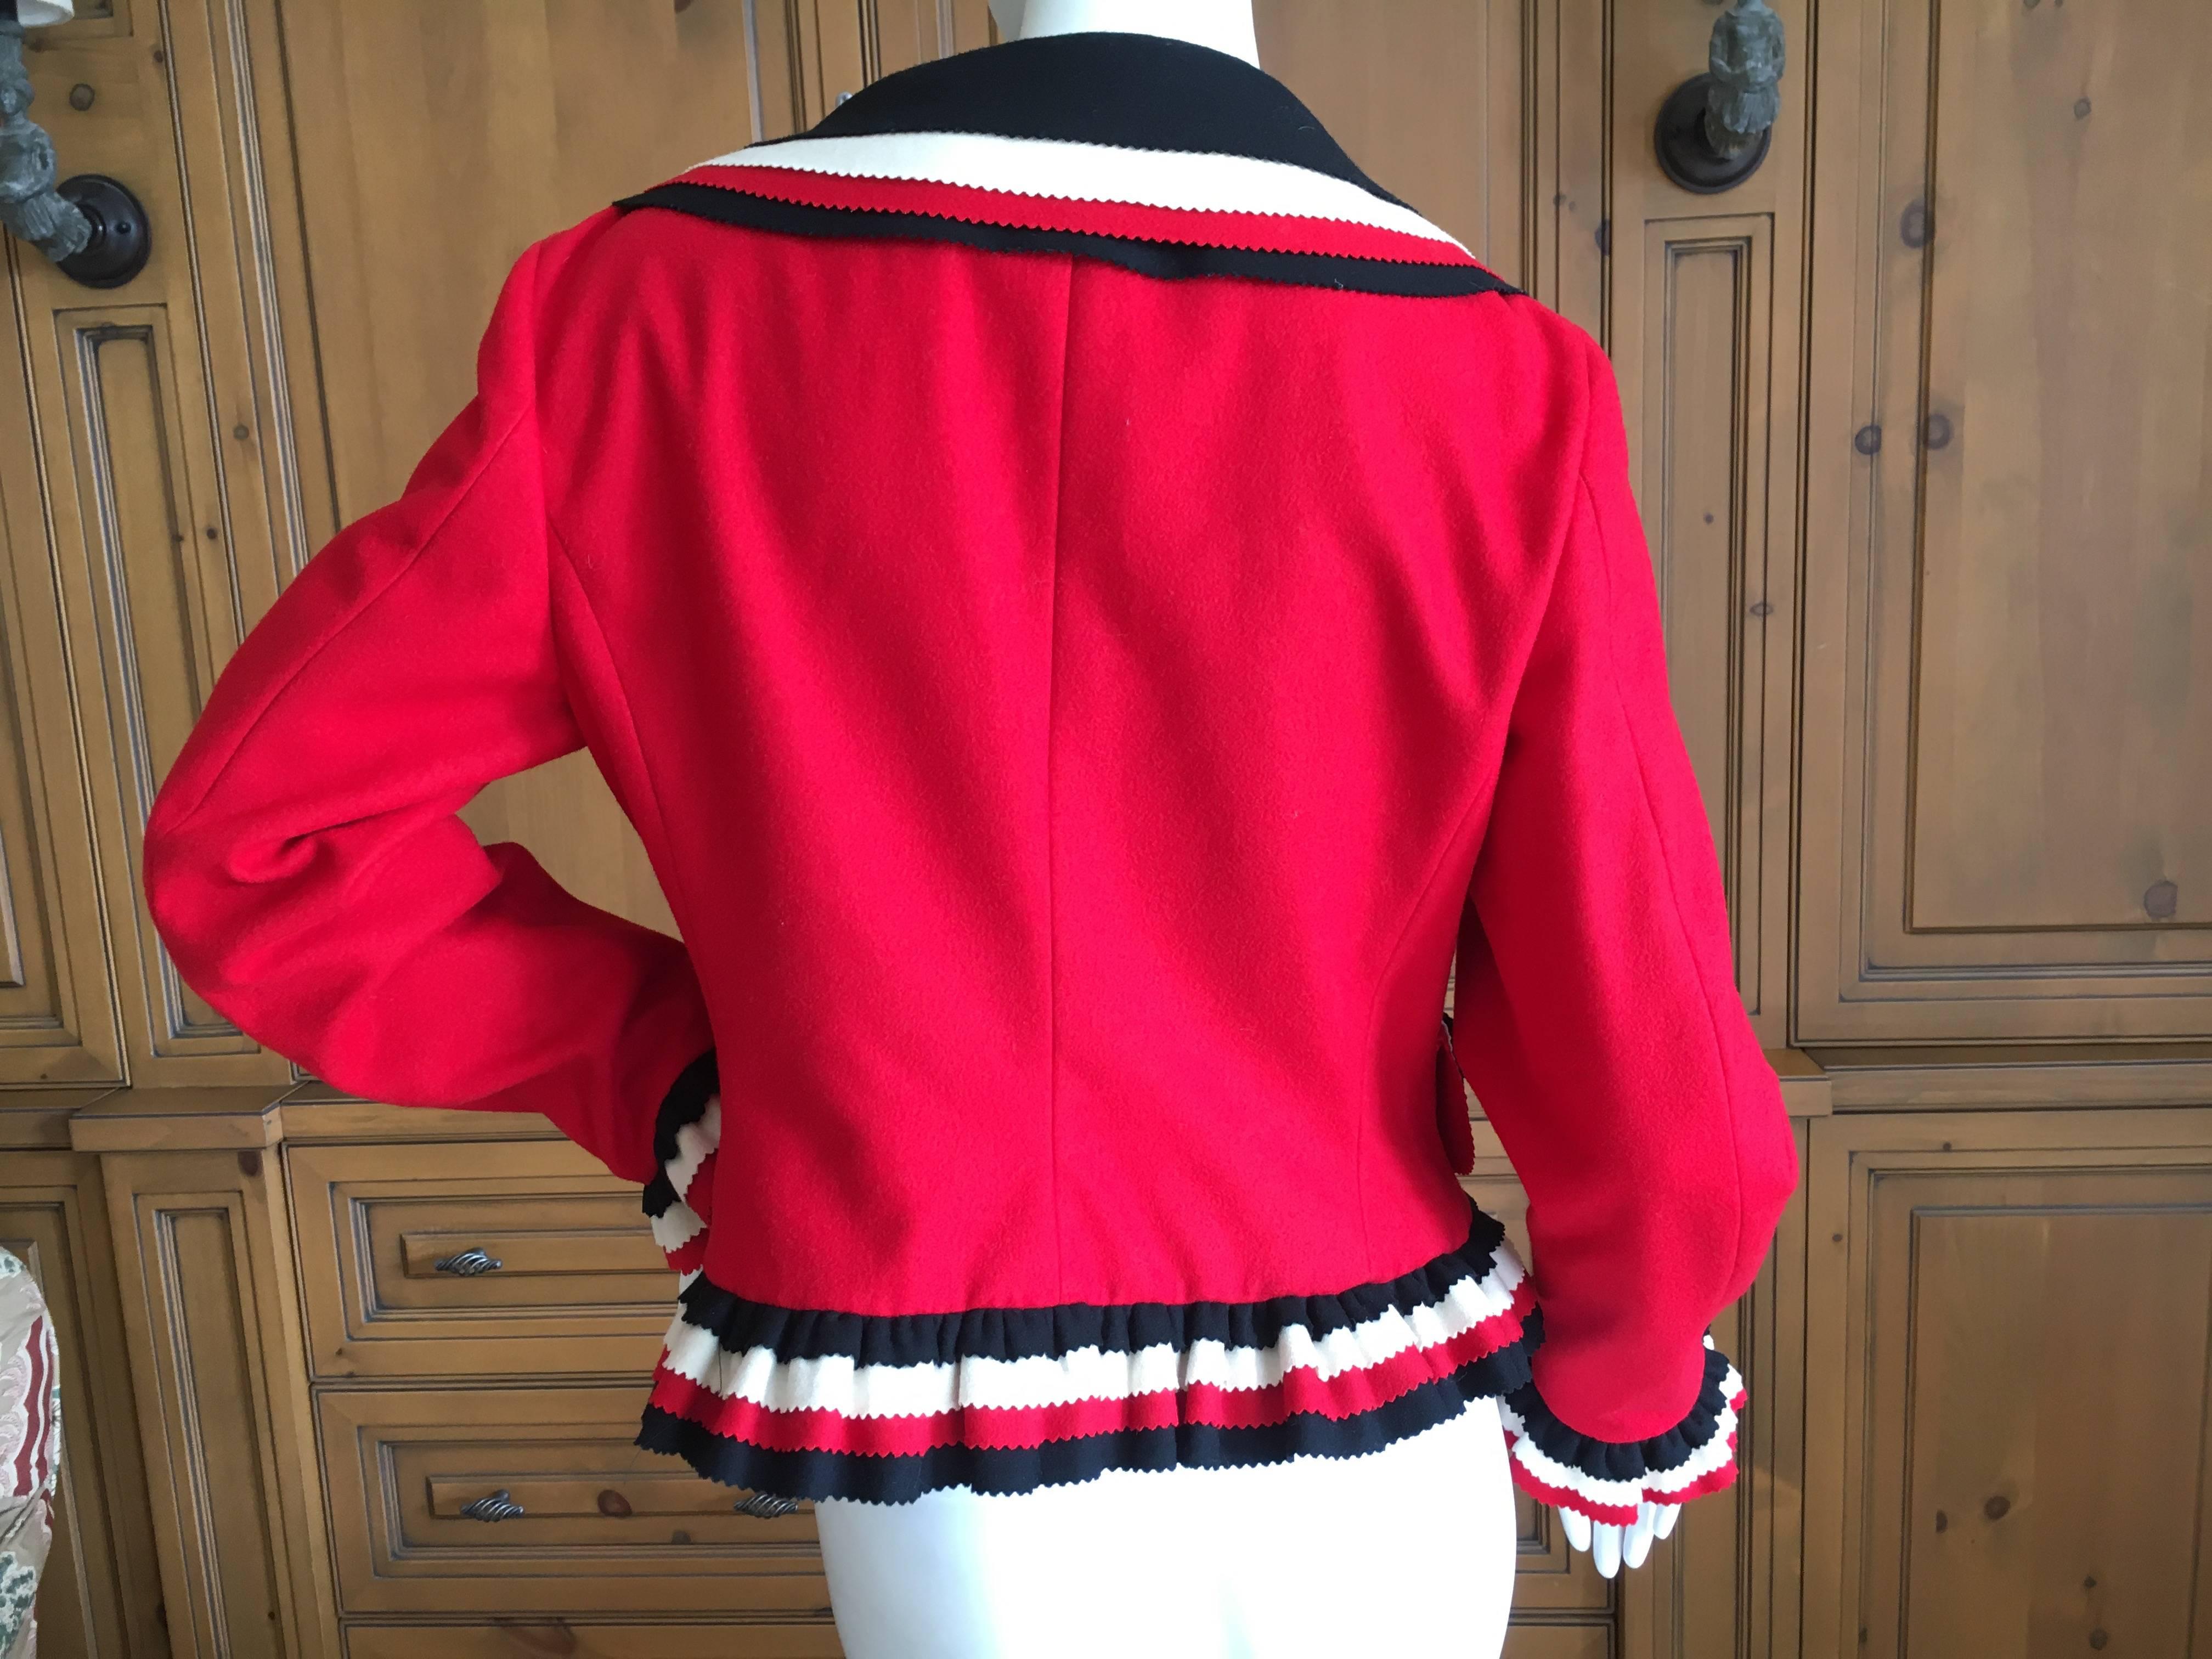 Moschino 1993 Ruffled Red Jacket In Good Condition For Sale In Cloverdale, CA